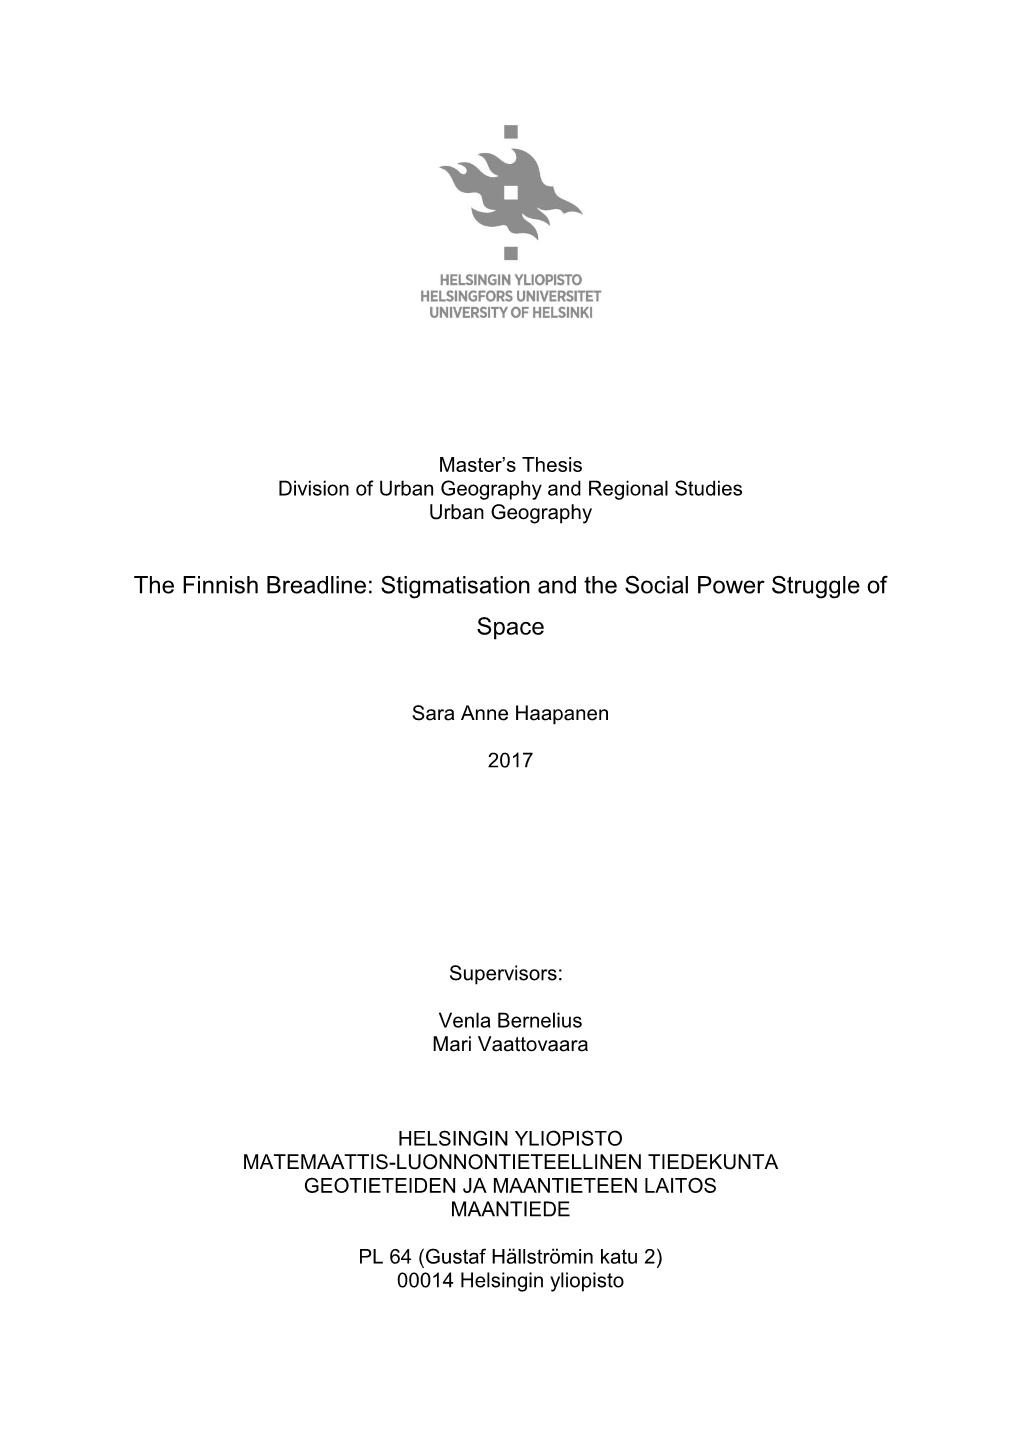 The Finnish Breadline: Stigmatisation and the Social Power Struggle of Space